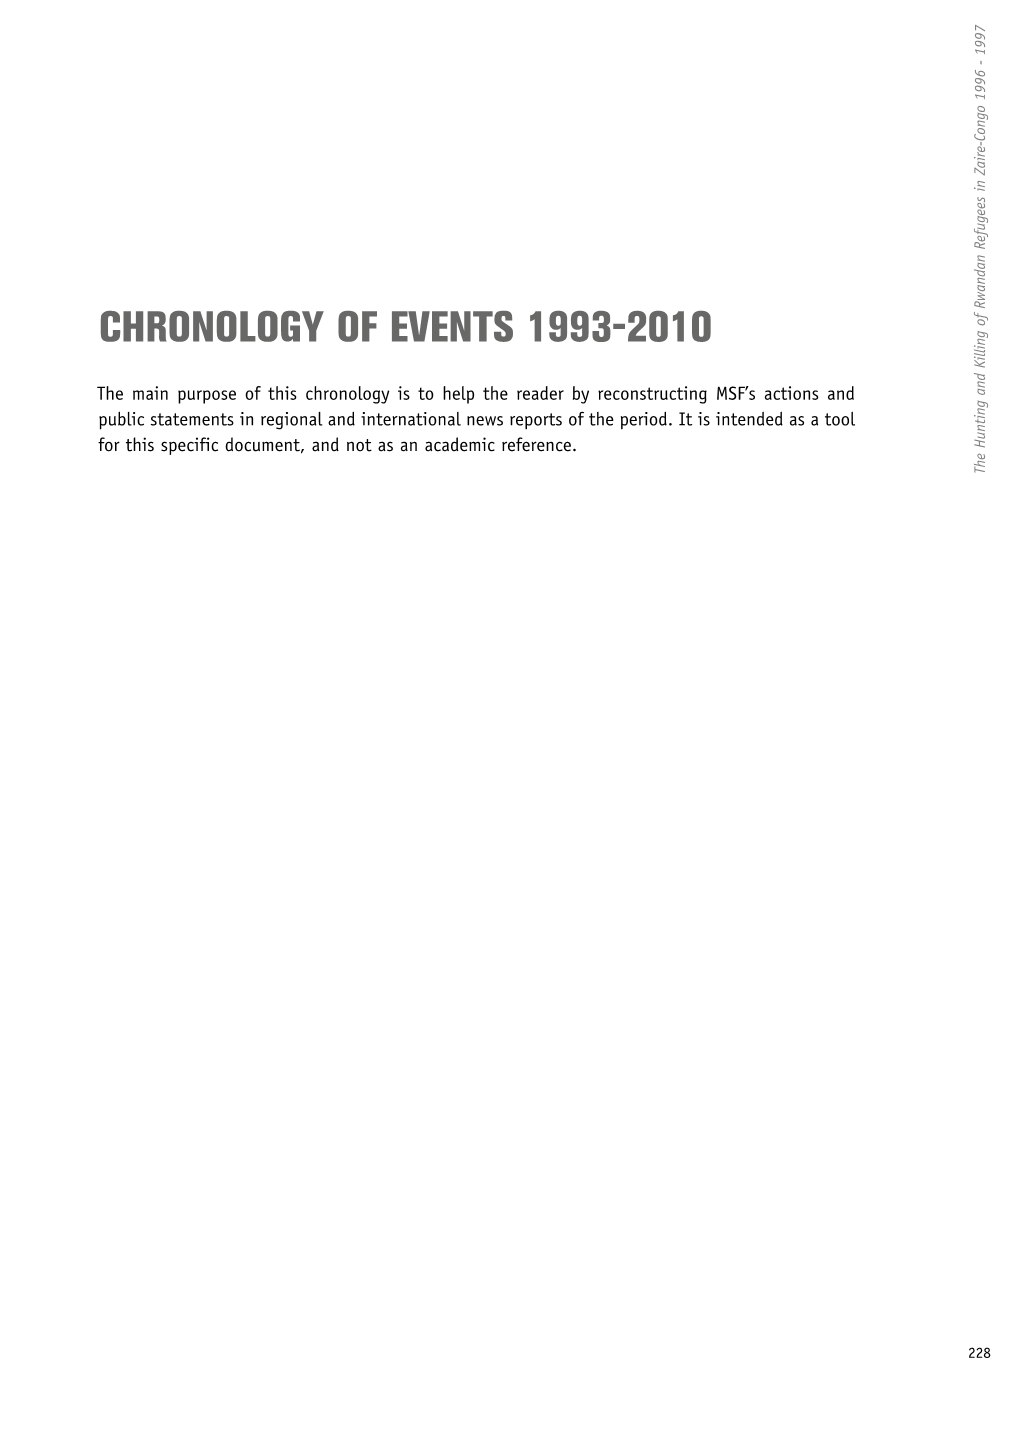 Chronology of Events 1993-2010